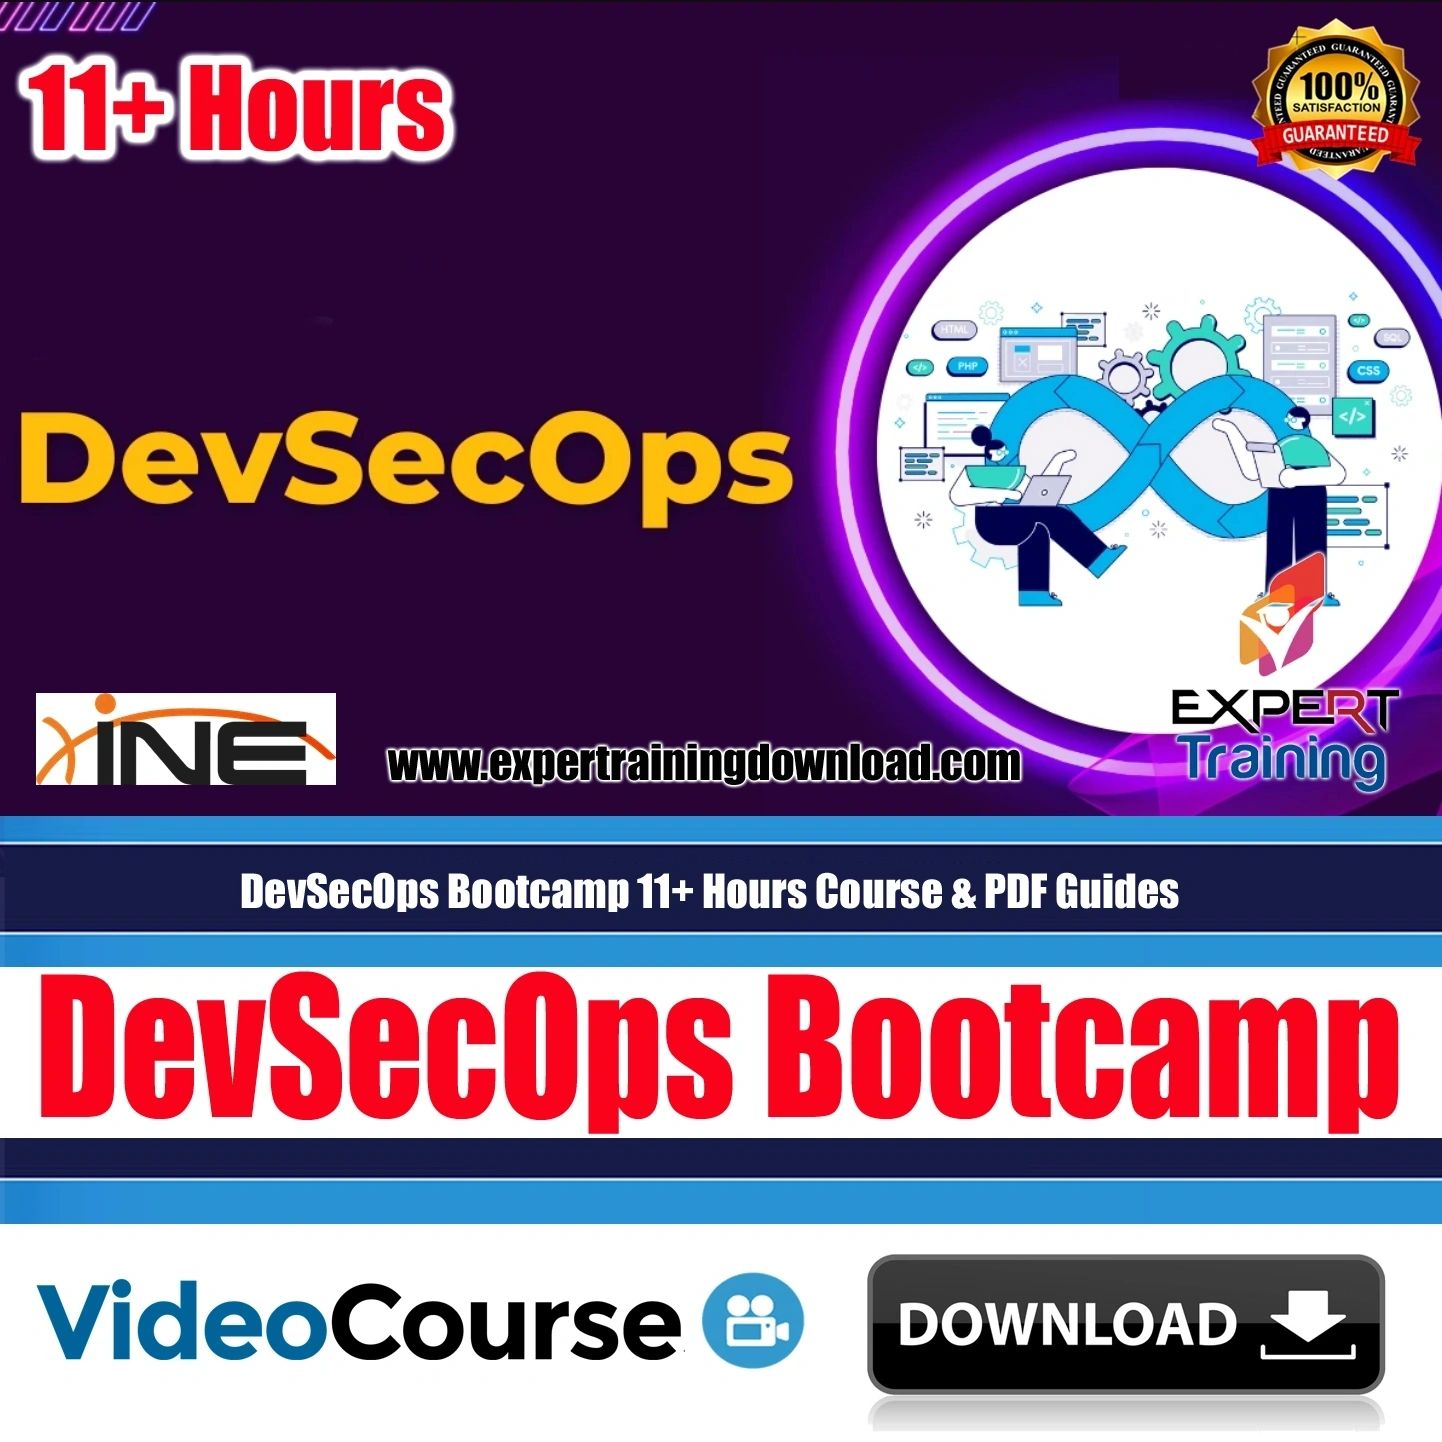 DevSecOps Bootcamp 11+ Hours Course & PDF Guides